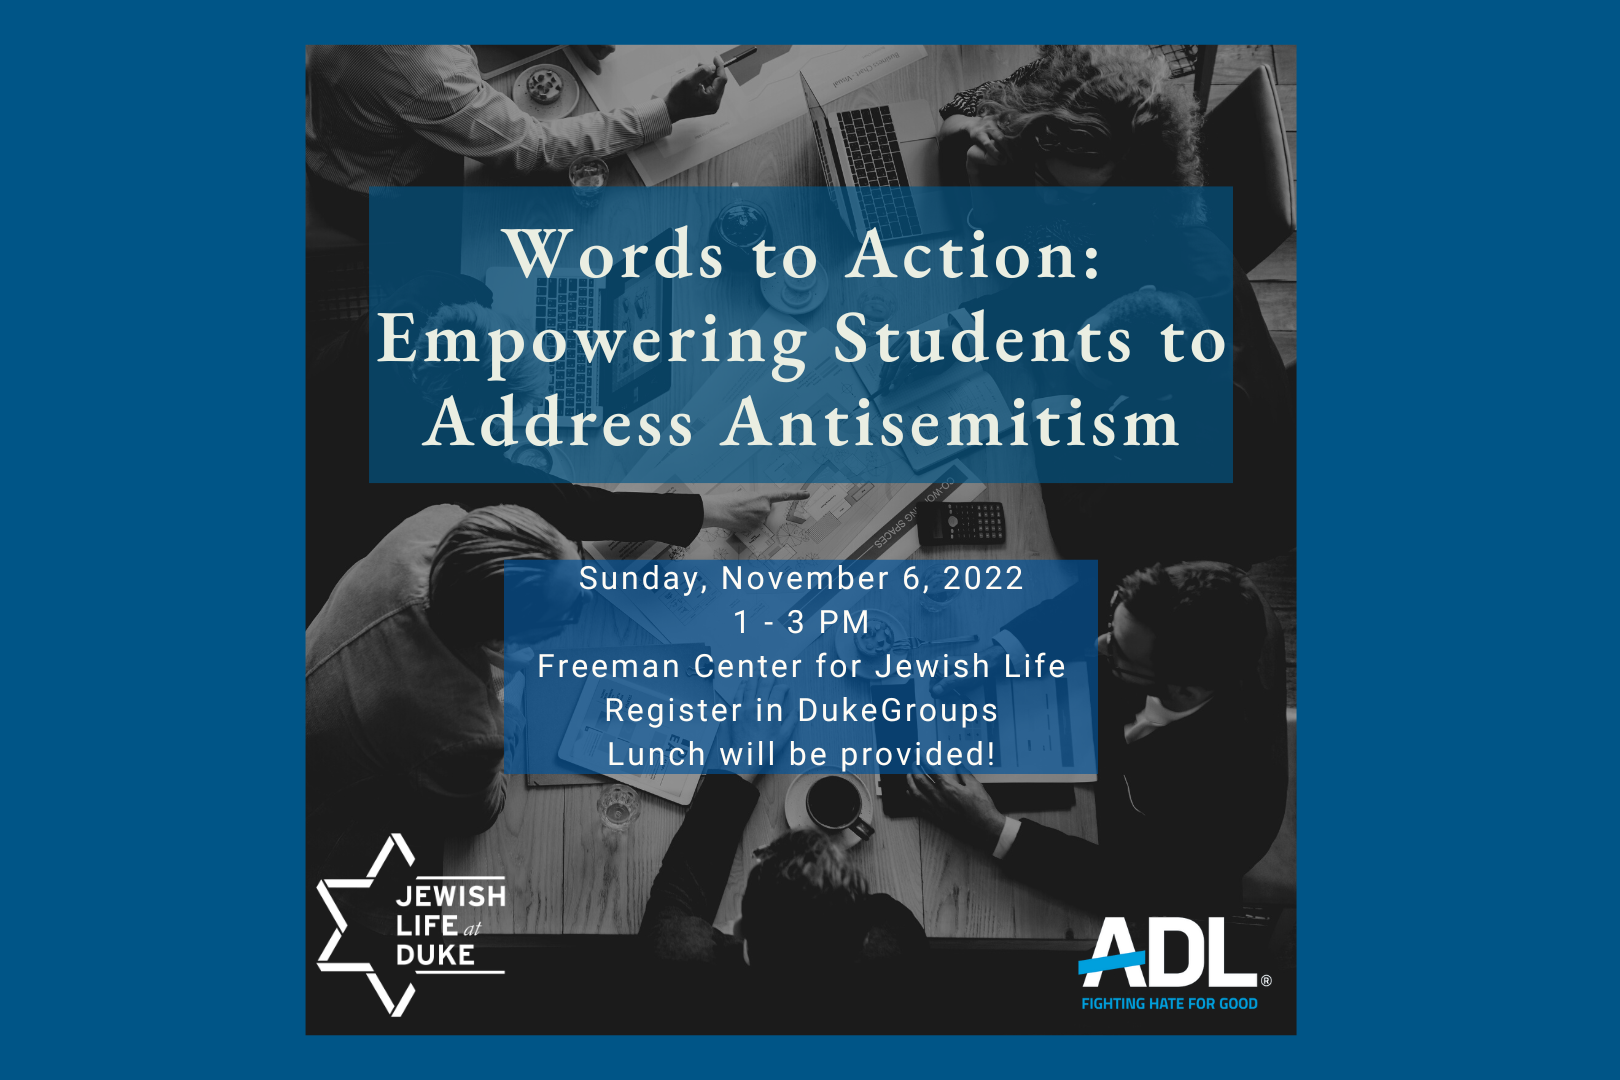 Words to Action: Empowering Students to Address Antisemitism